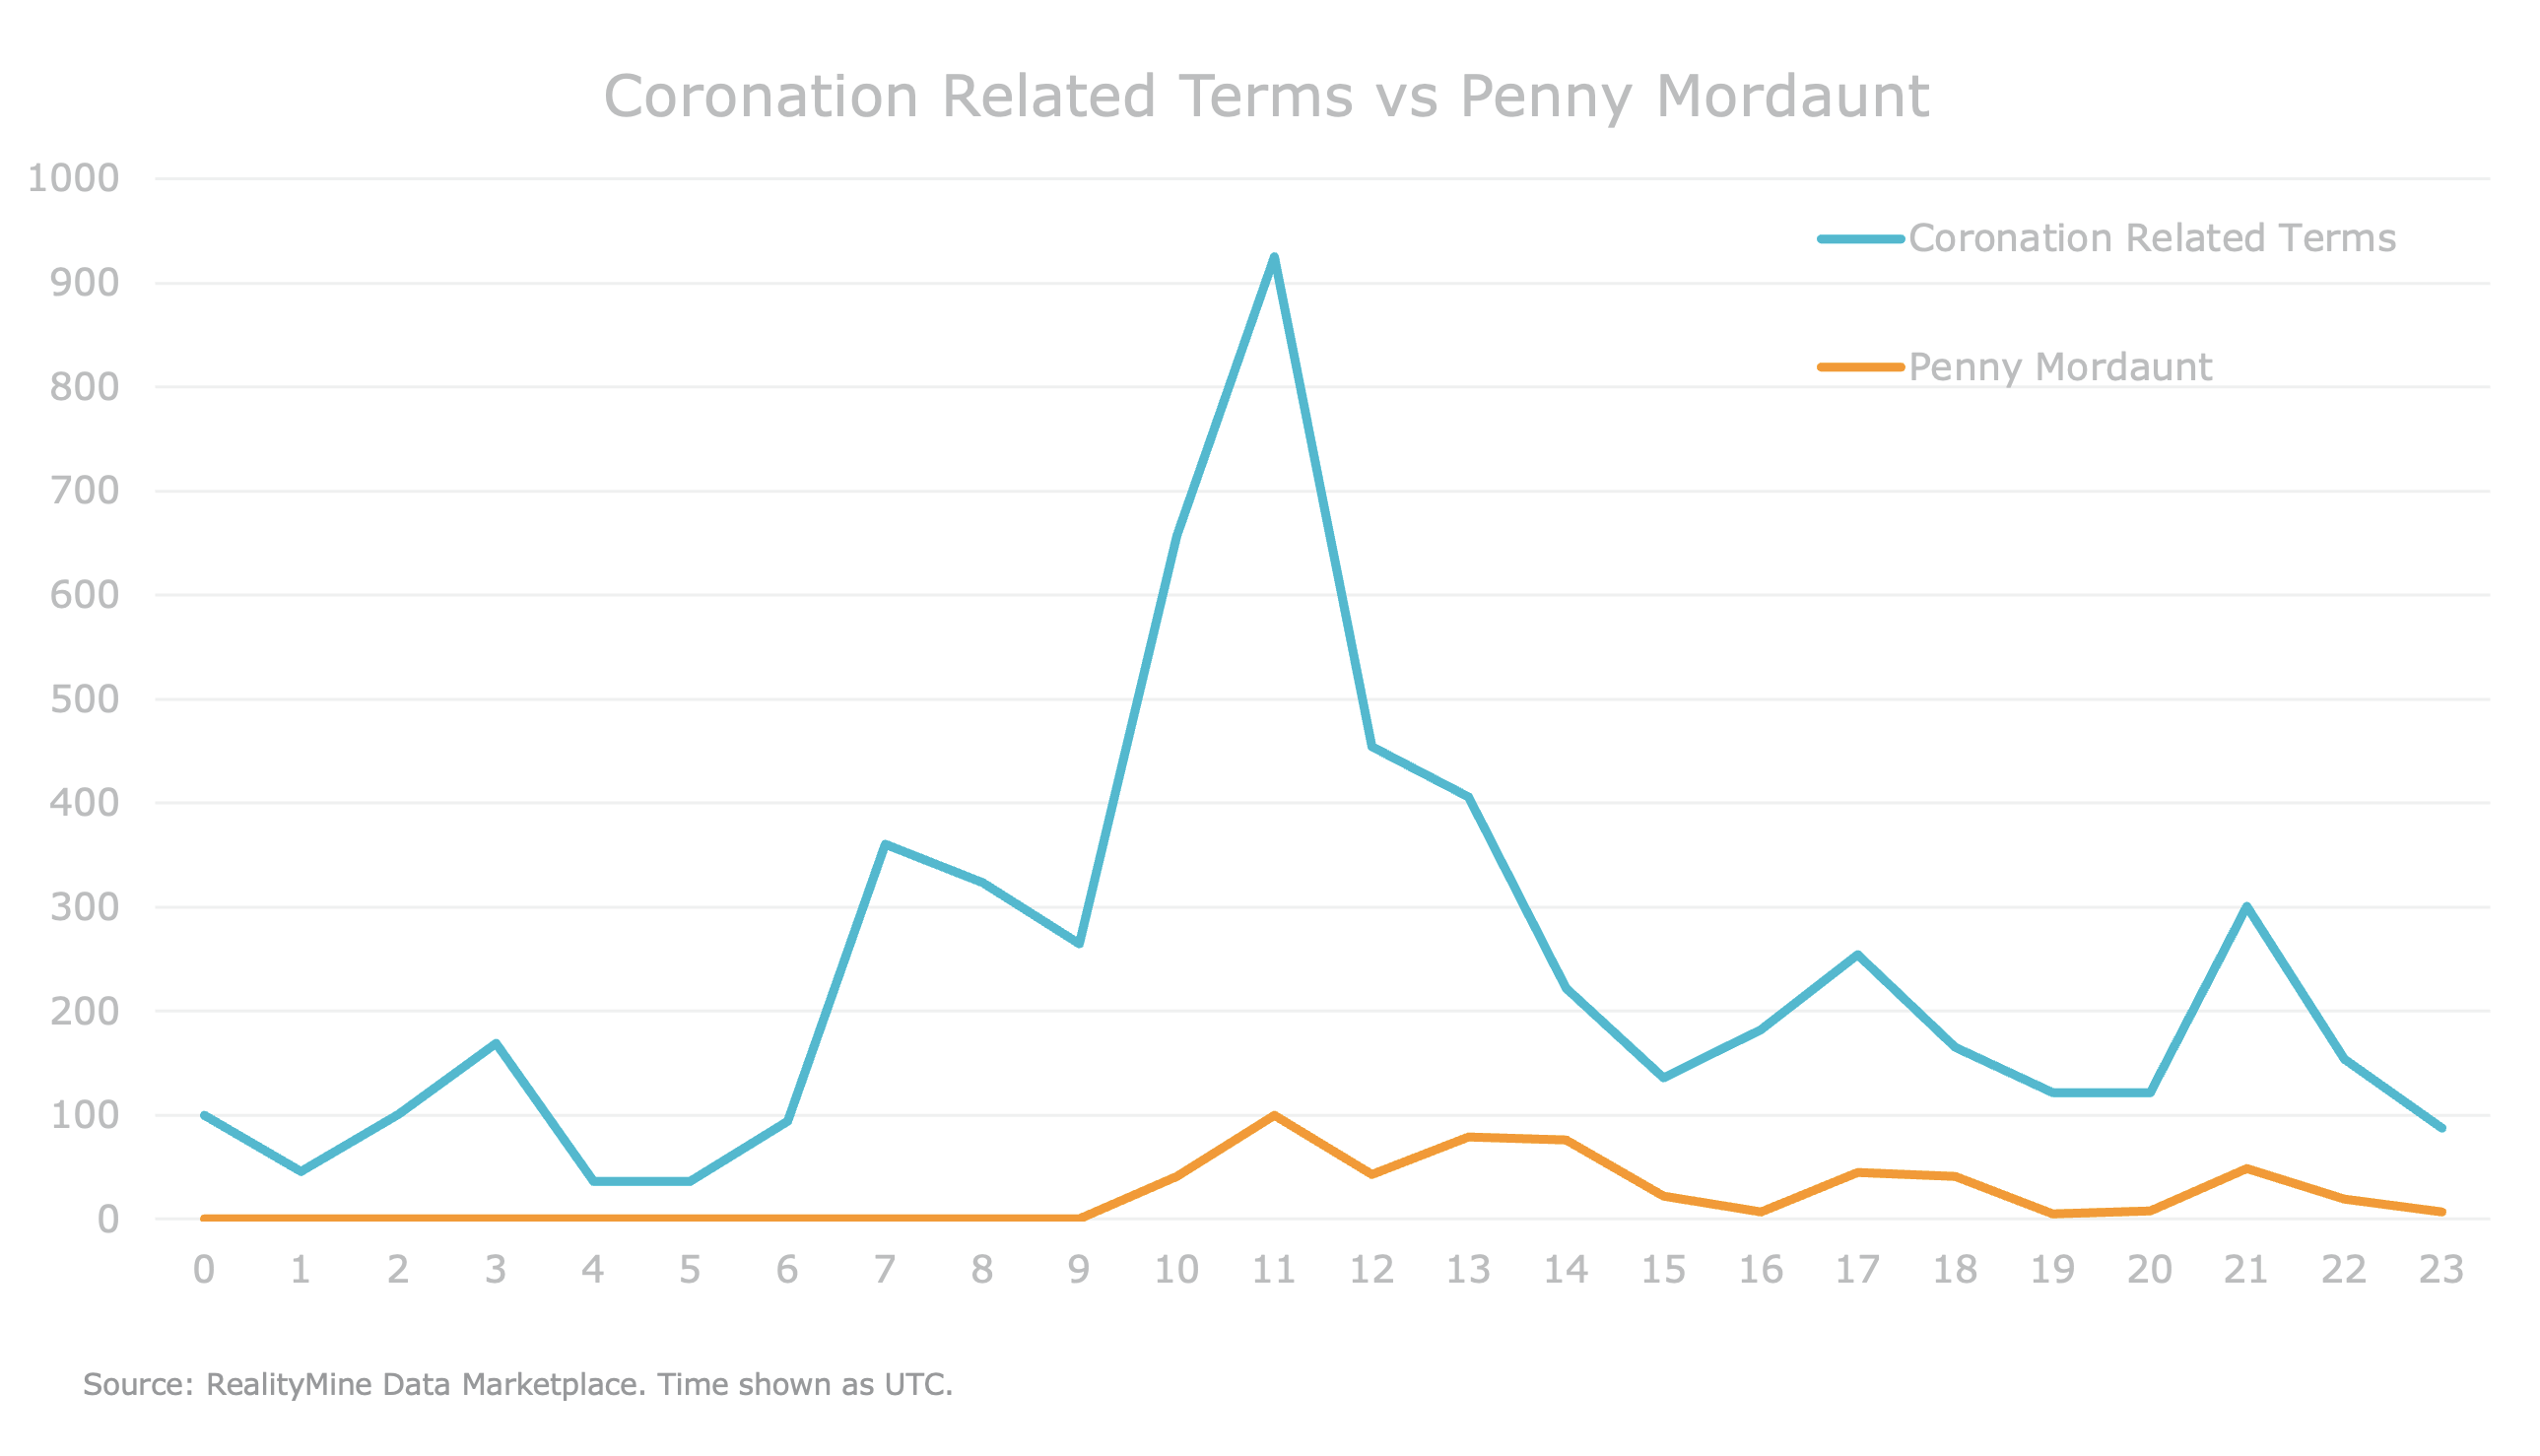 Line chart showing amount of online searches related to the Coronation on 6th May 2023 versus previous Saturday. The teal line, day of the Coronation, shows a spike during the morning, as the event was happening, peaking at around the time King Charles III was crowned, while the orange line (Penny Mordaunt searches) remains lower, but shows an increase at the same time as teal line does.